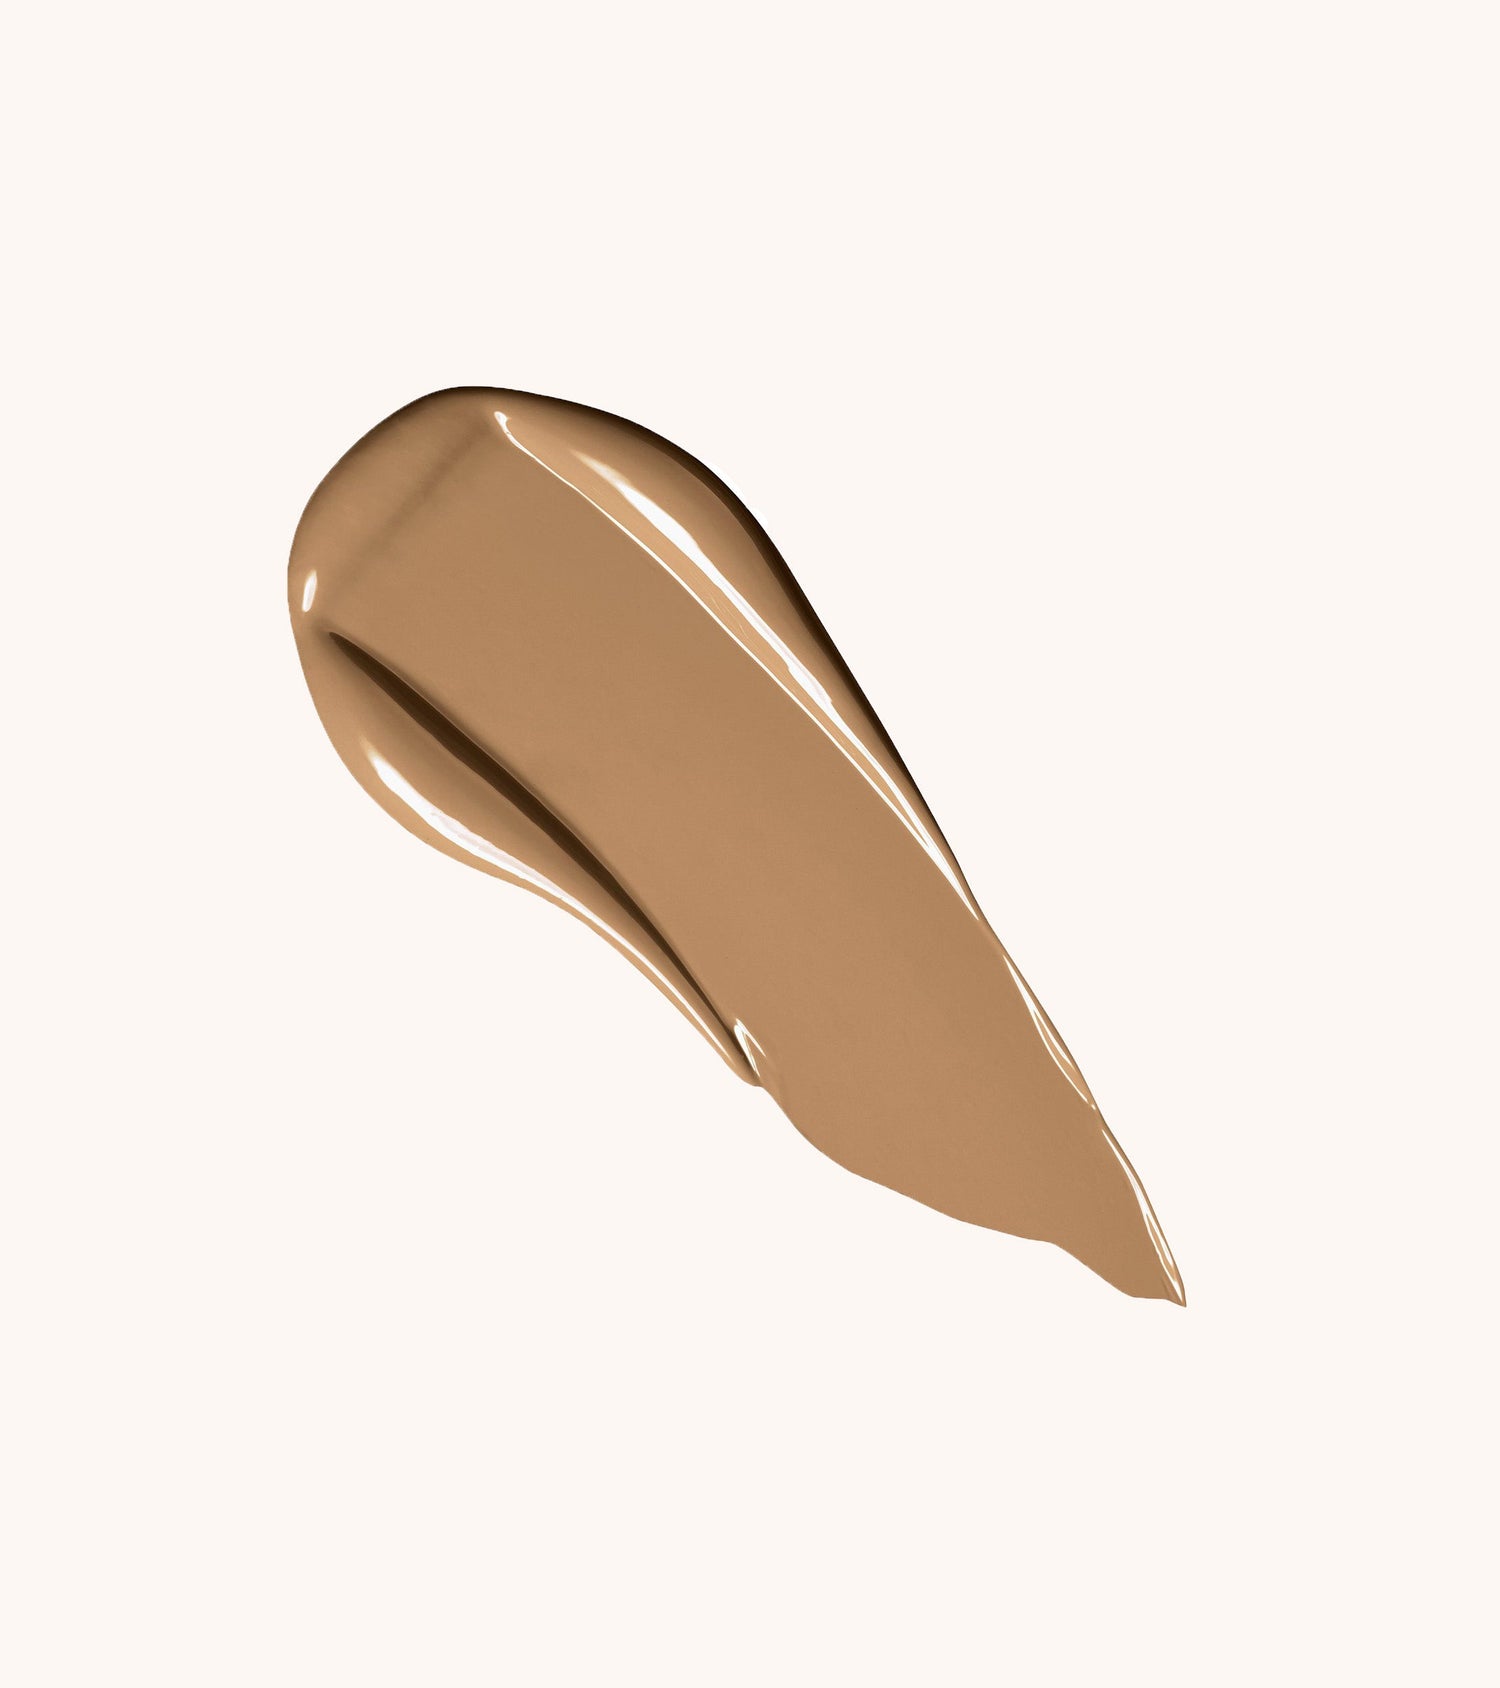 Authentik Skin Perfector Concealer (190 Positive) Main Image featured